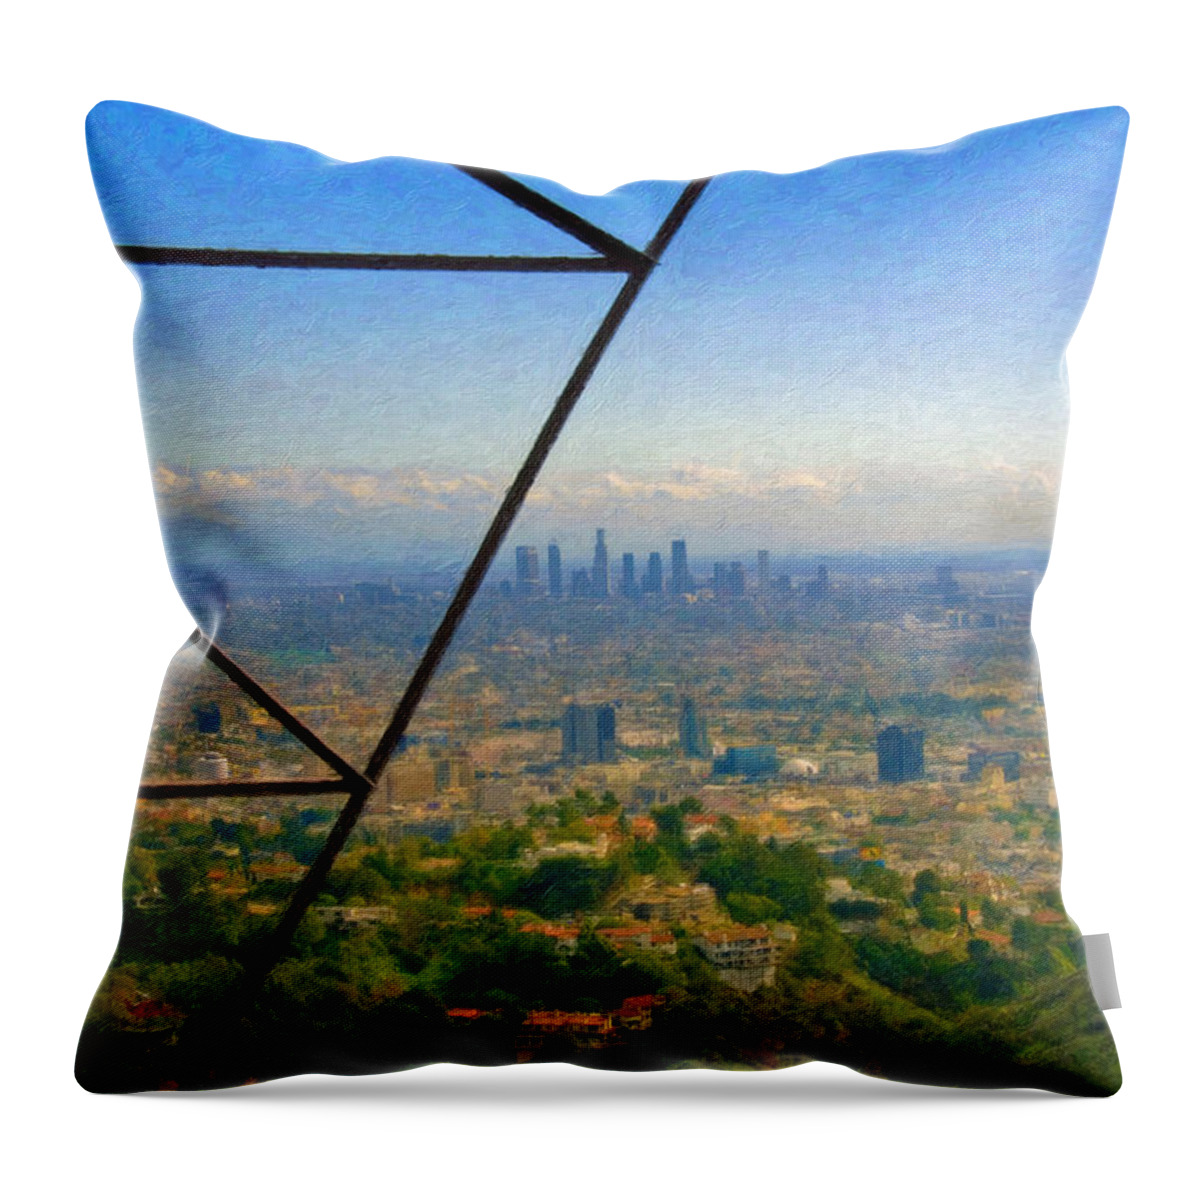 Power Lines Los Angeles Skyline Throw Pillow featuring the photograph Power Lines Los Angeles Skyline by David Zanzinger